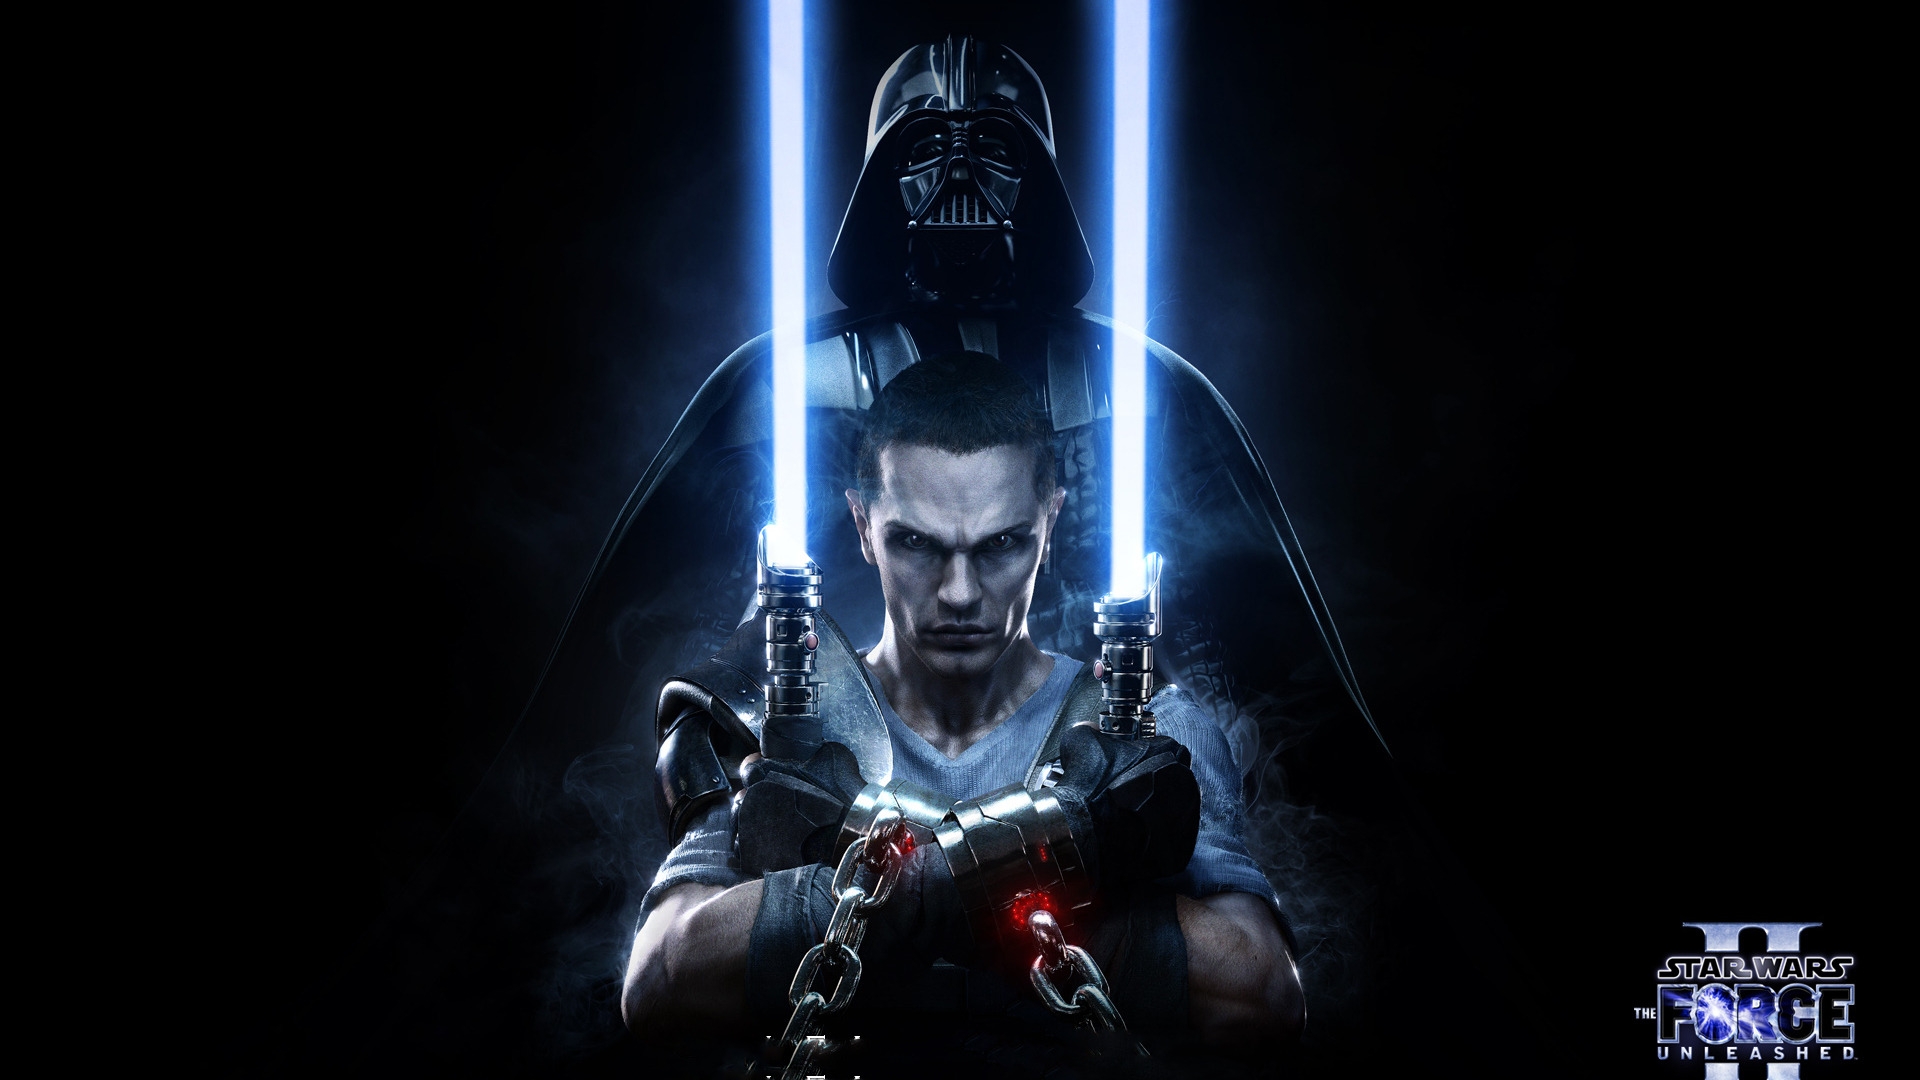 Star Wars The force Unleashed 2 Poster for 1920 x 1080 HDTV 1080p resolution